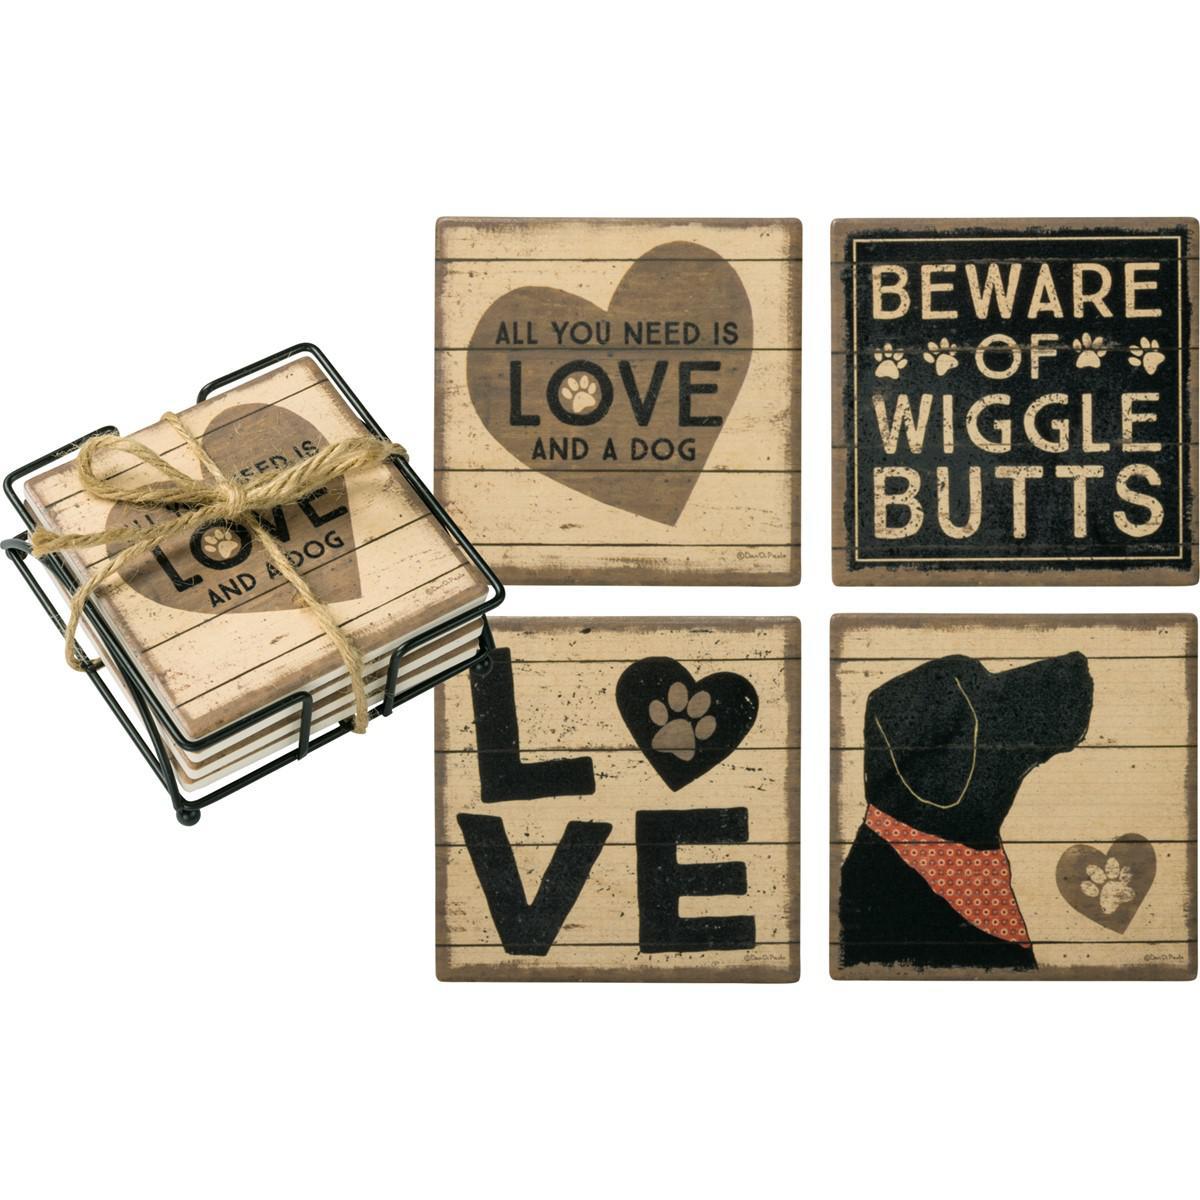 All You Need Is Love And A Dog Coasters